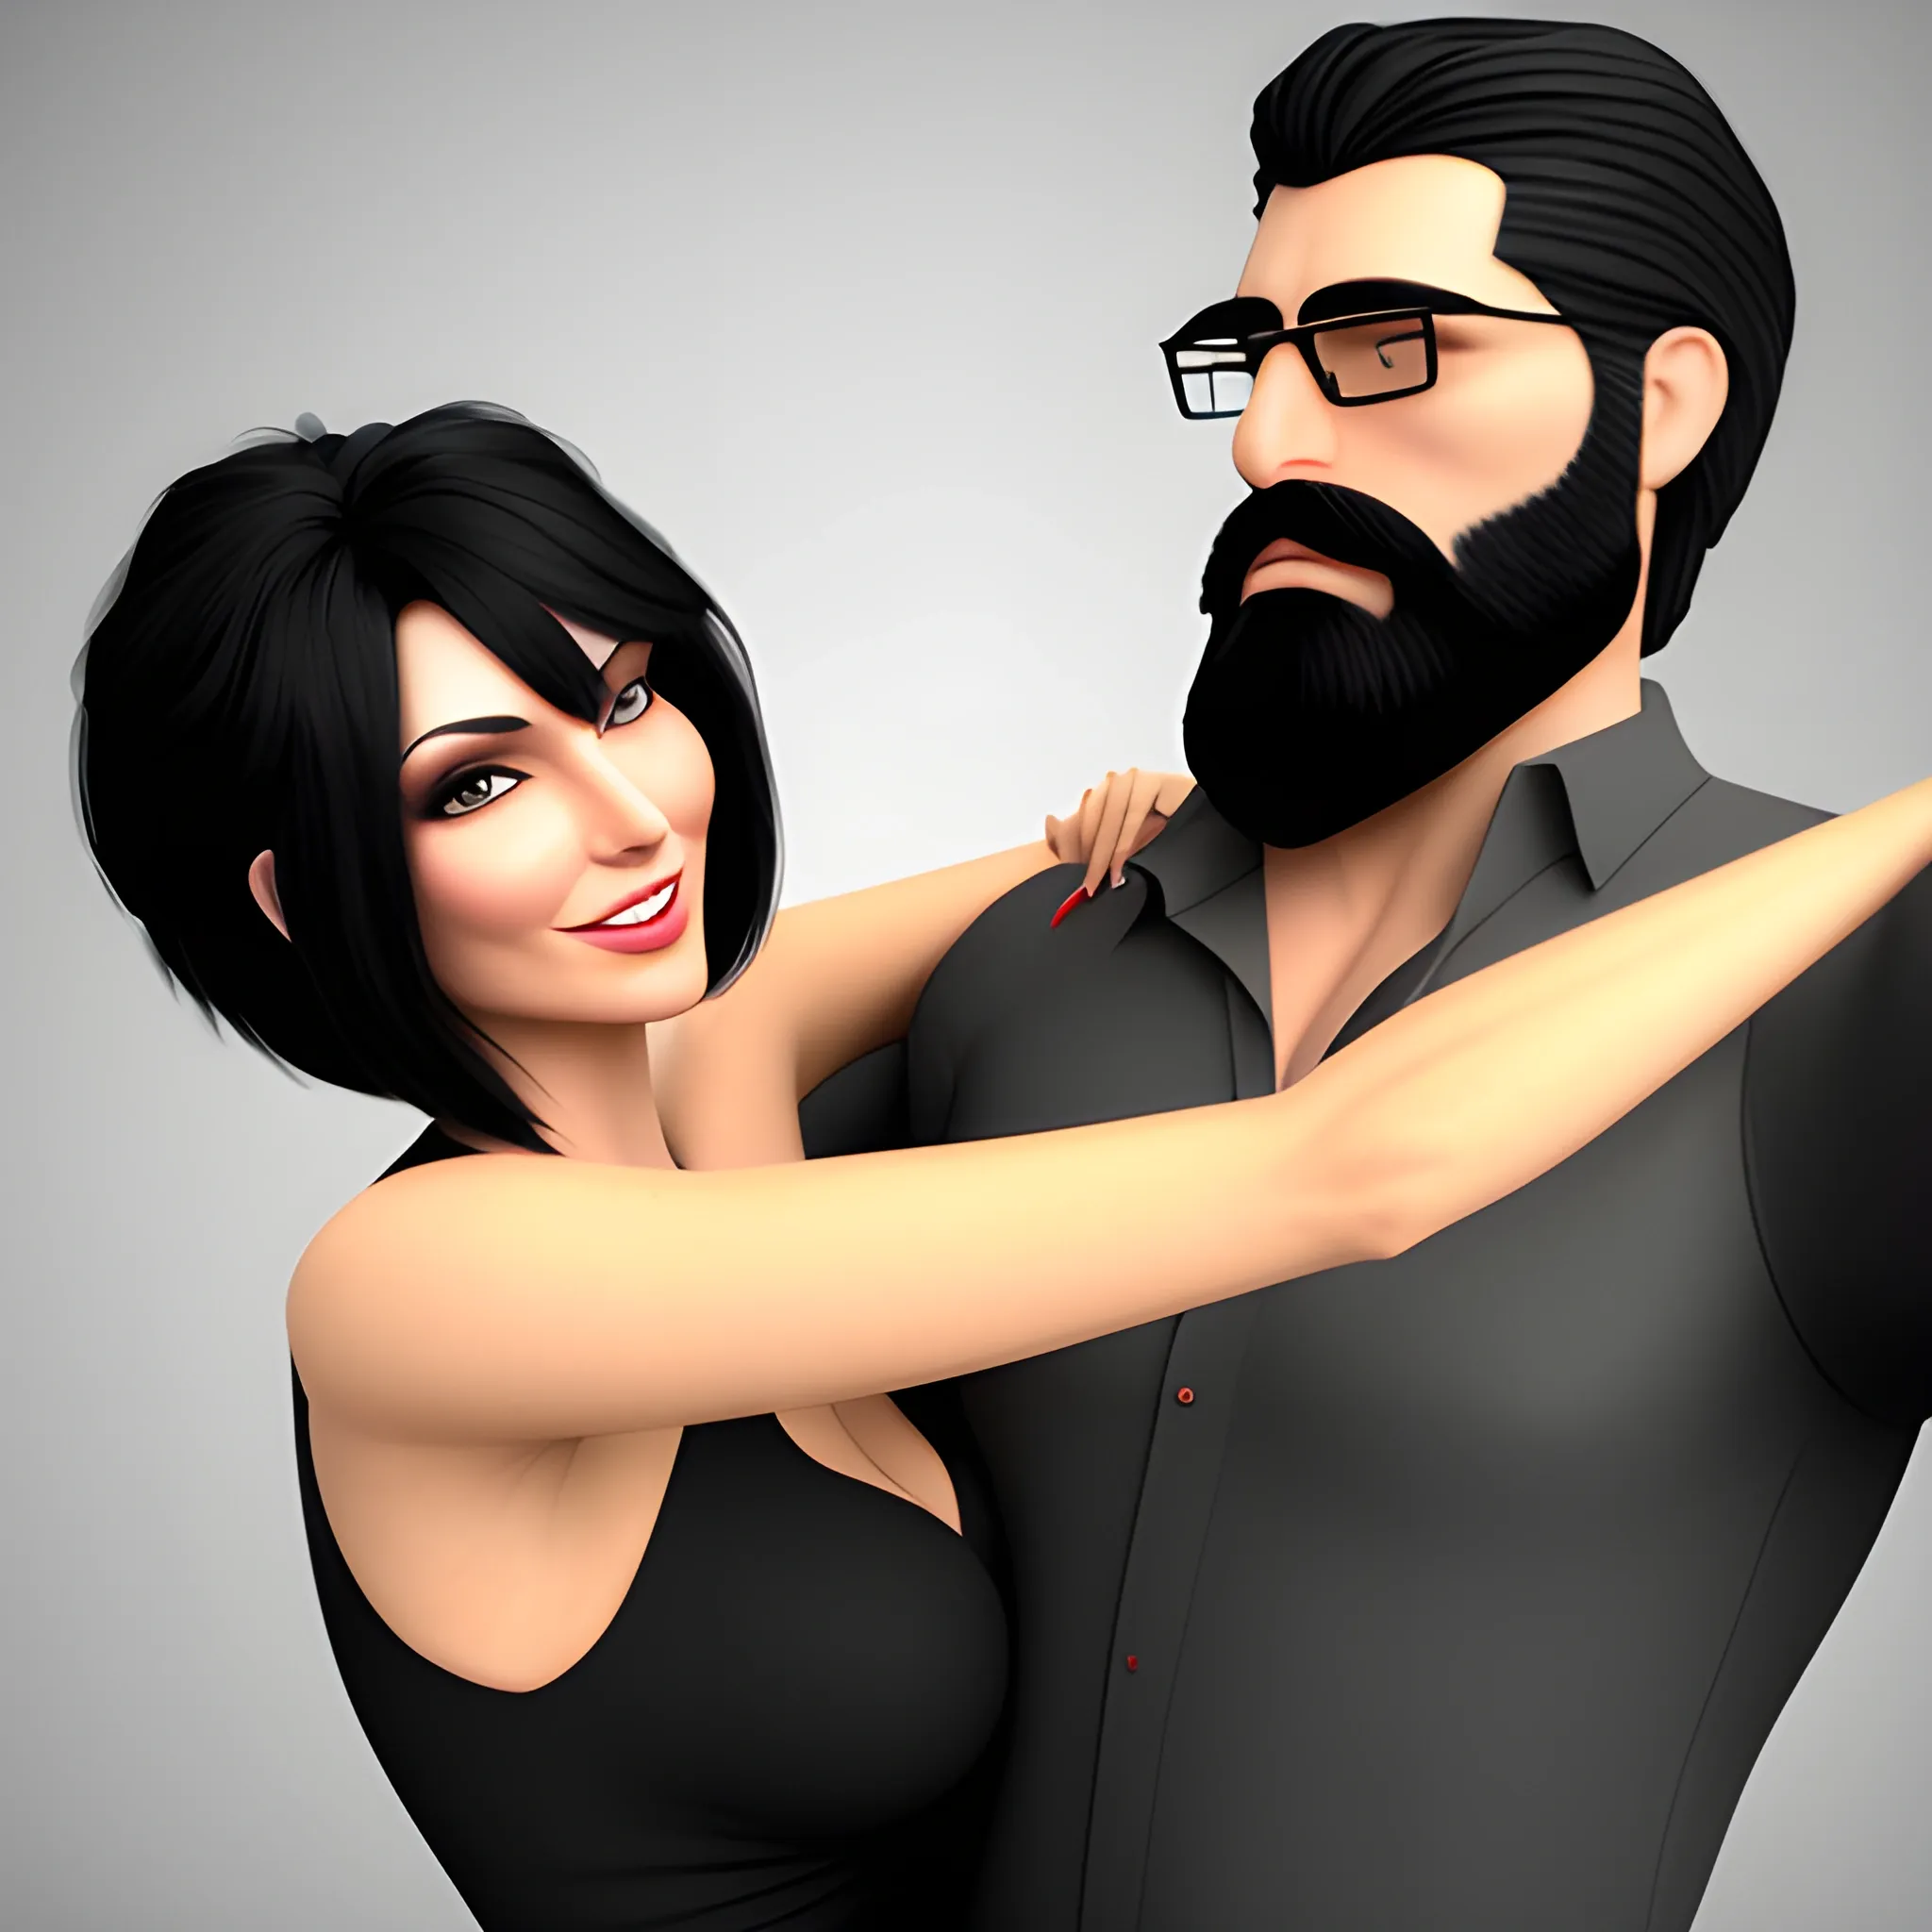 , 3D short black haired girl, reaching up to hug a tall dark haired bearded man
